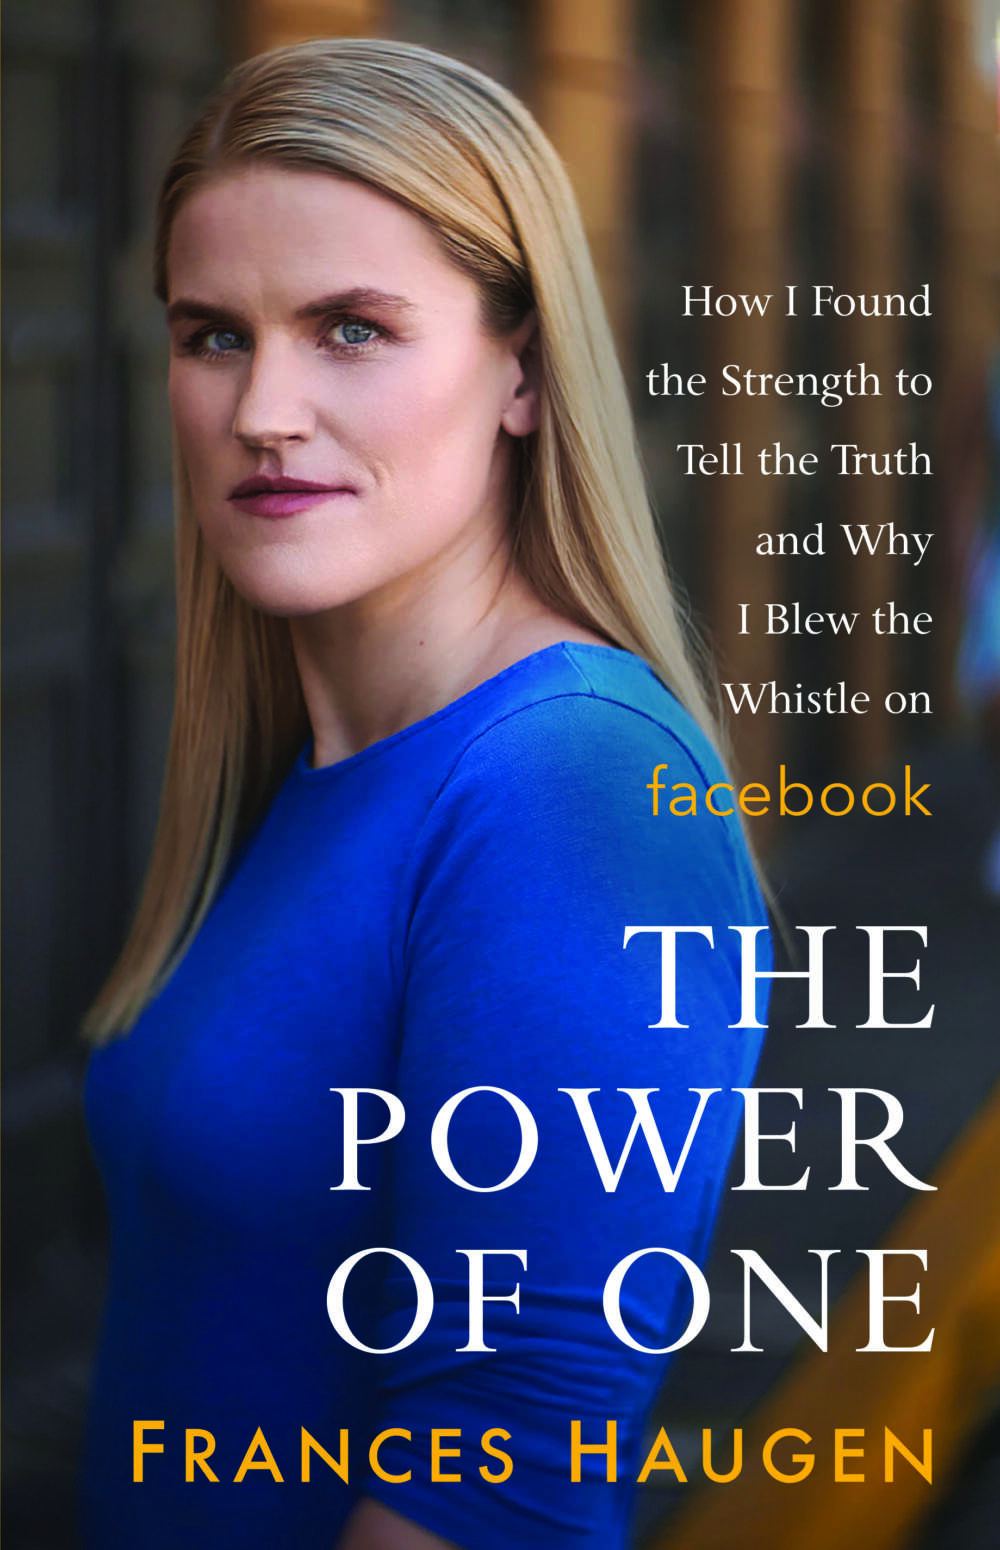 The cover of "The Power of One: How I Found the Strength to Tell the Truth and Why I Blew the Whistle on Facebook" by Frances Haugen. (Courtesy)